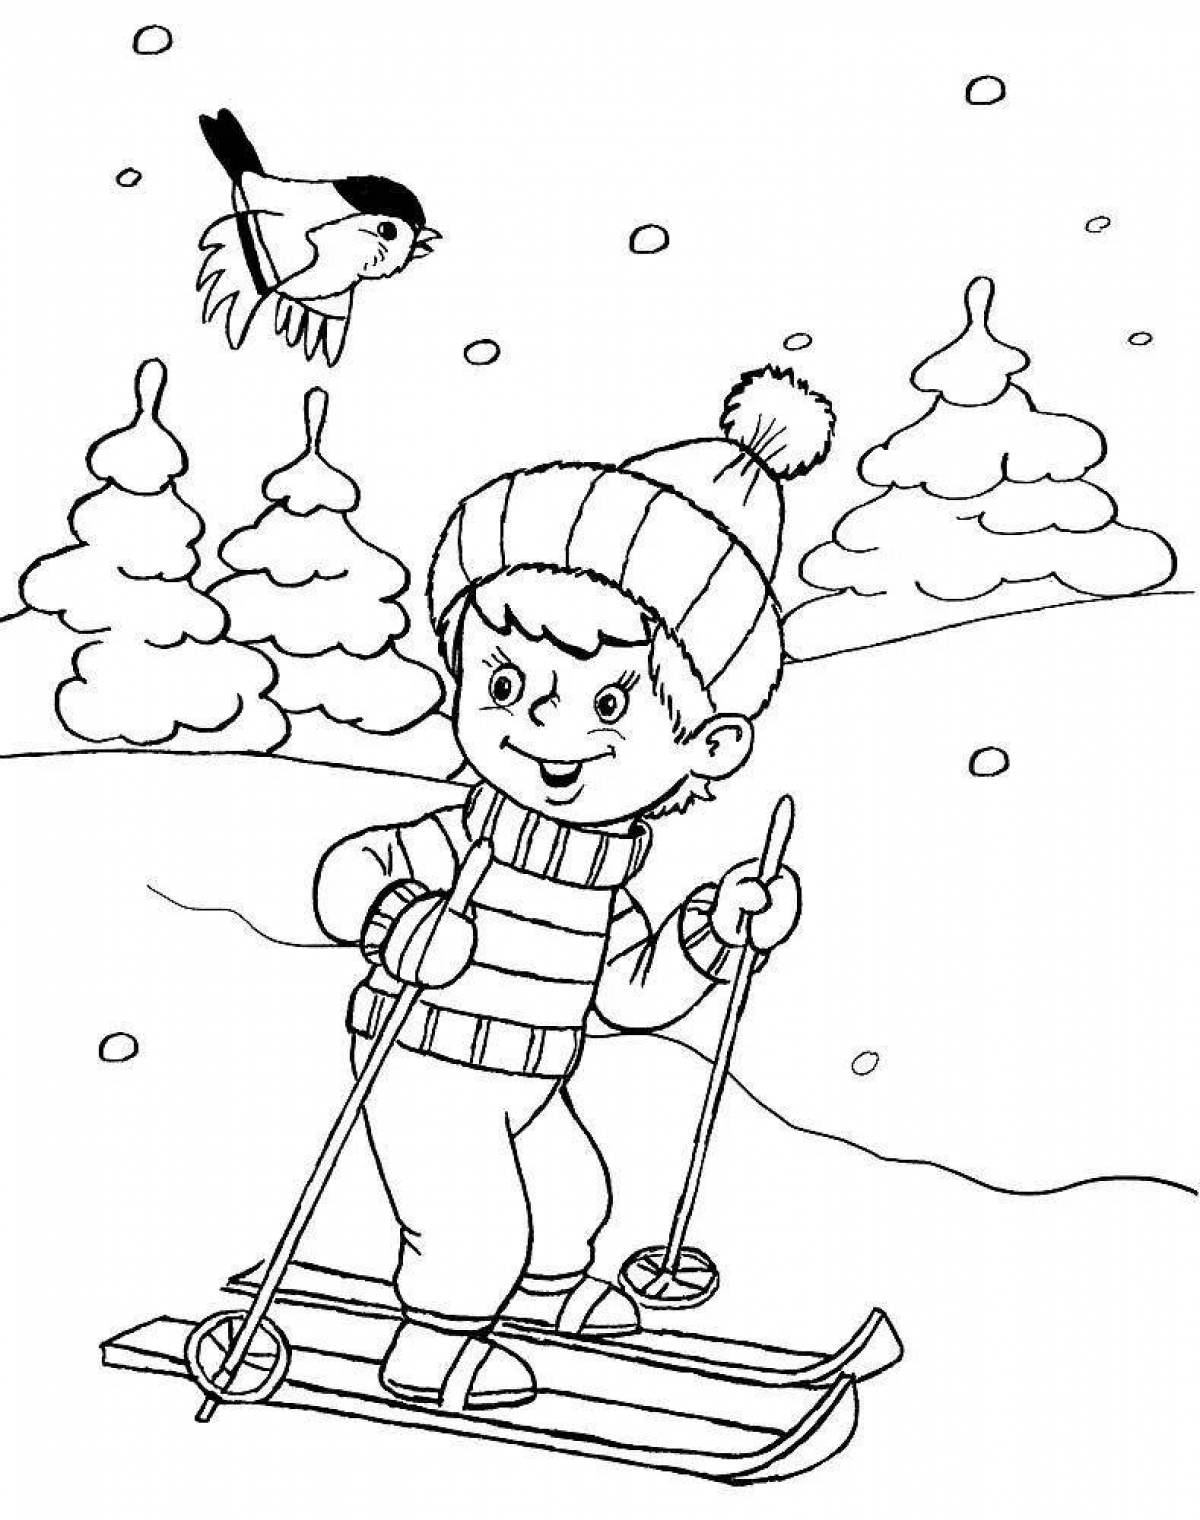 Dazzling winter coloring book for 6-7 year olds